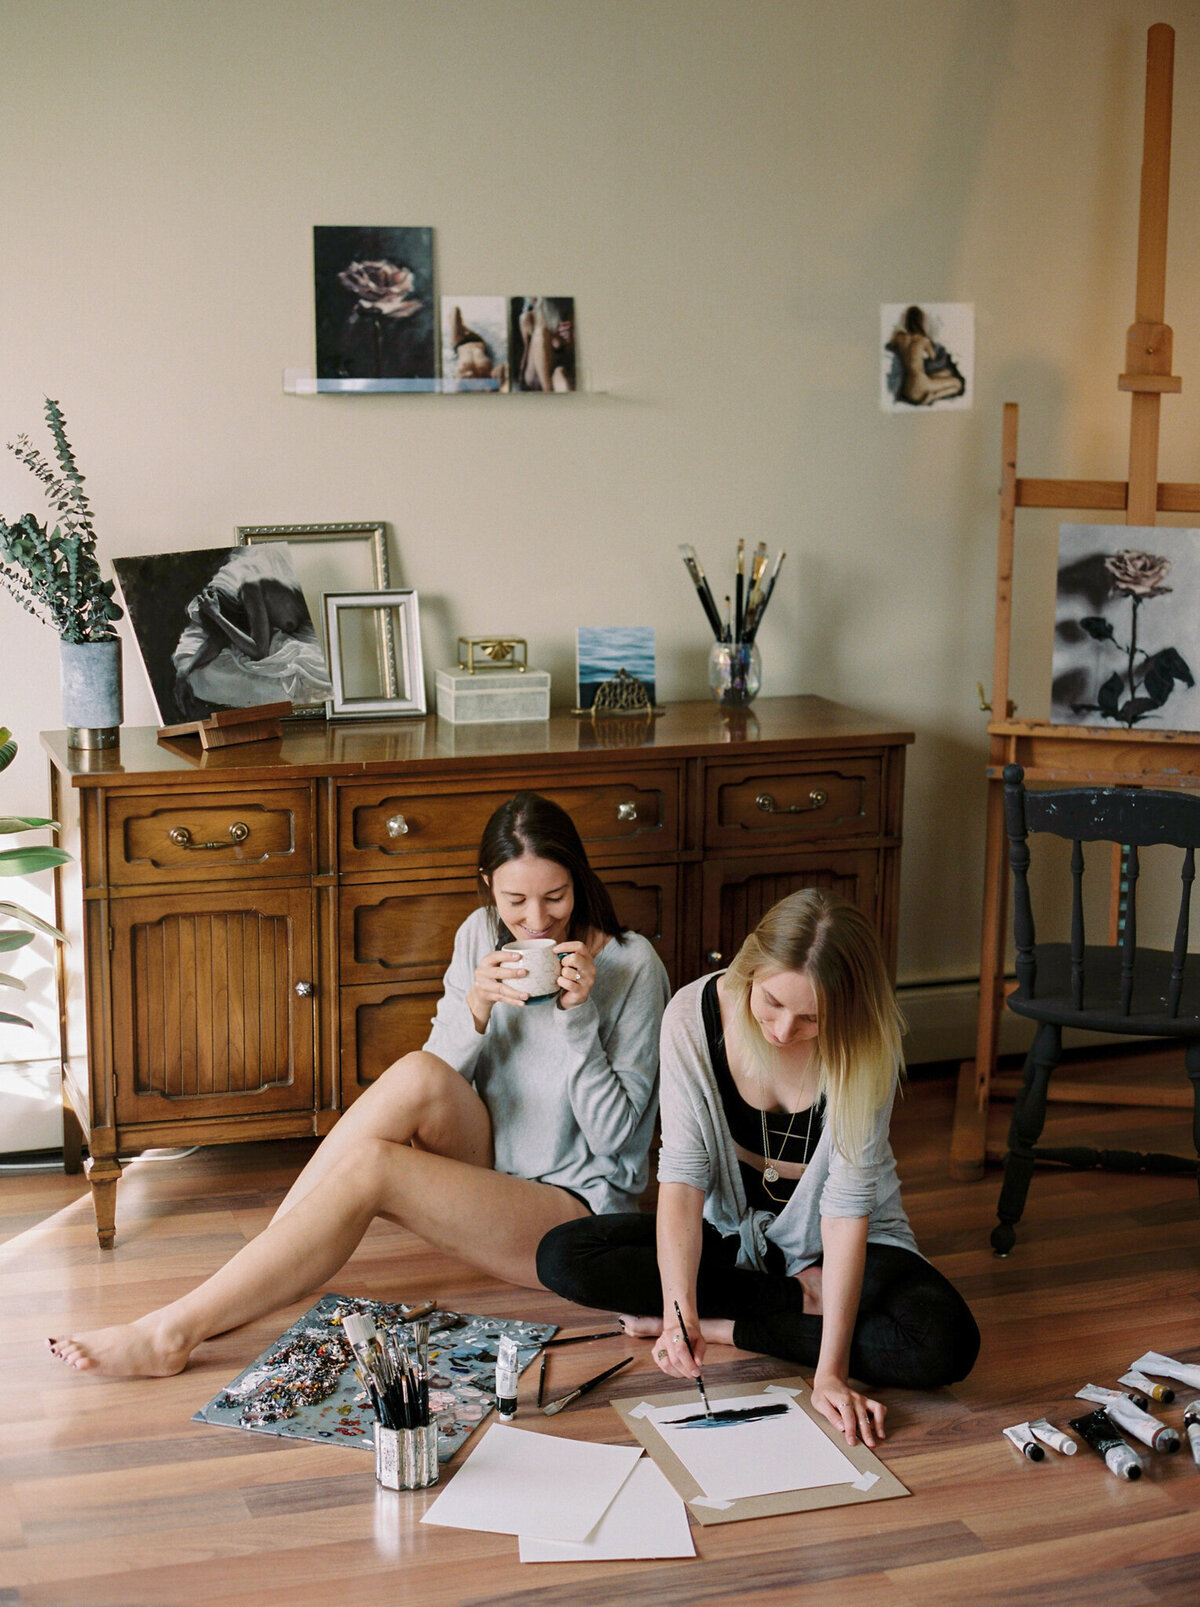 In-home engagement session, same sex couple sits on floor in living room together, captured by Justine Milton Photography, fine art  wedding photographer & videographer in Calgary Alberta. Featured on the Bronte Bride Vendor Guide.